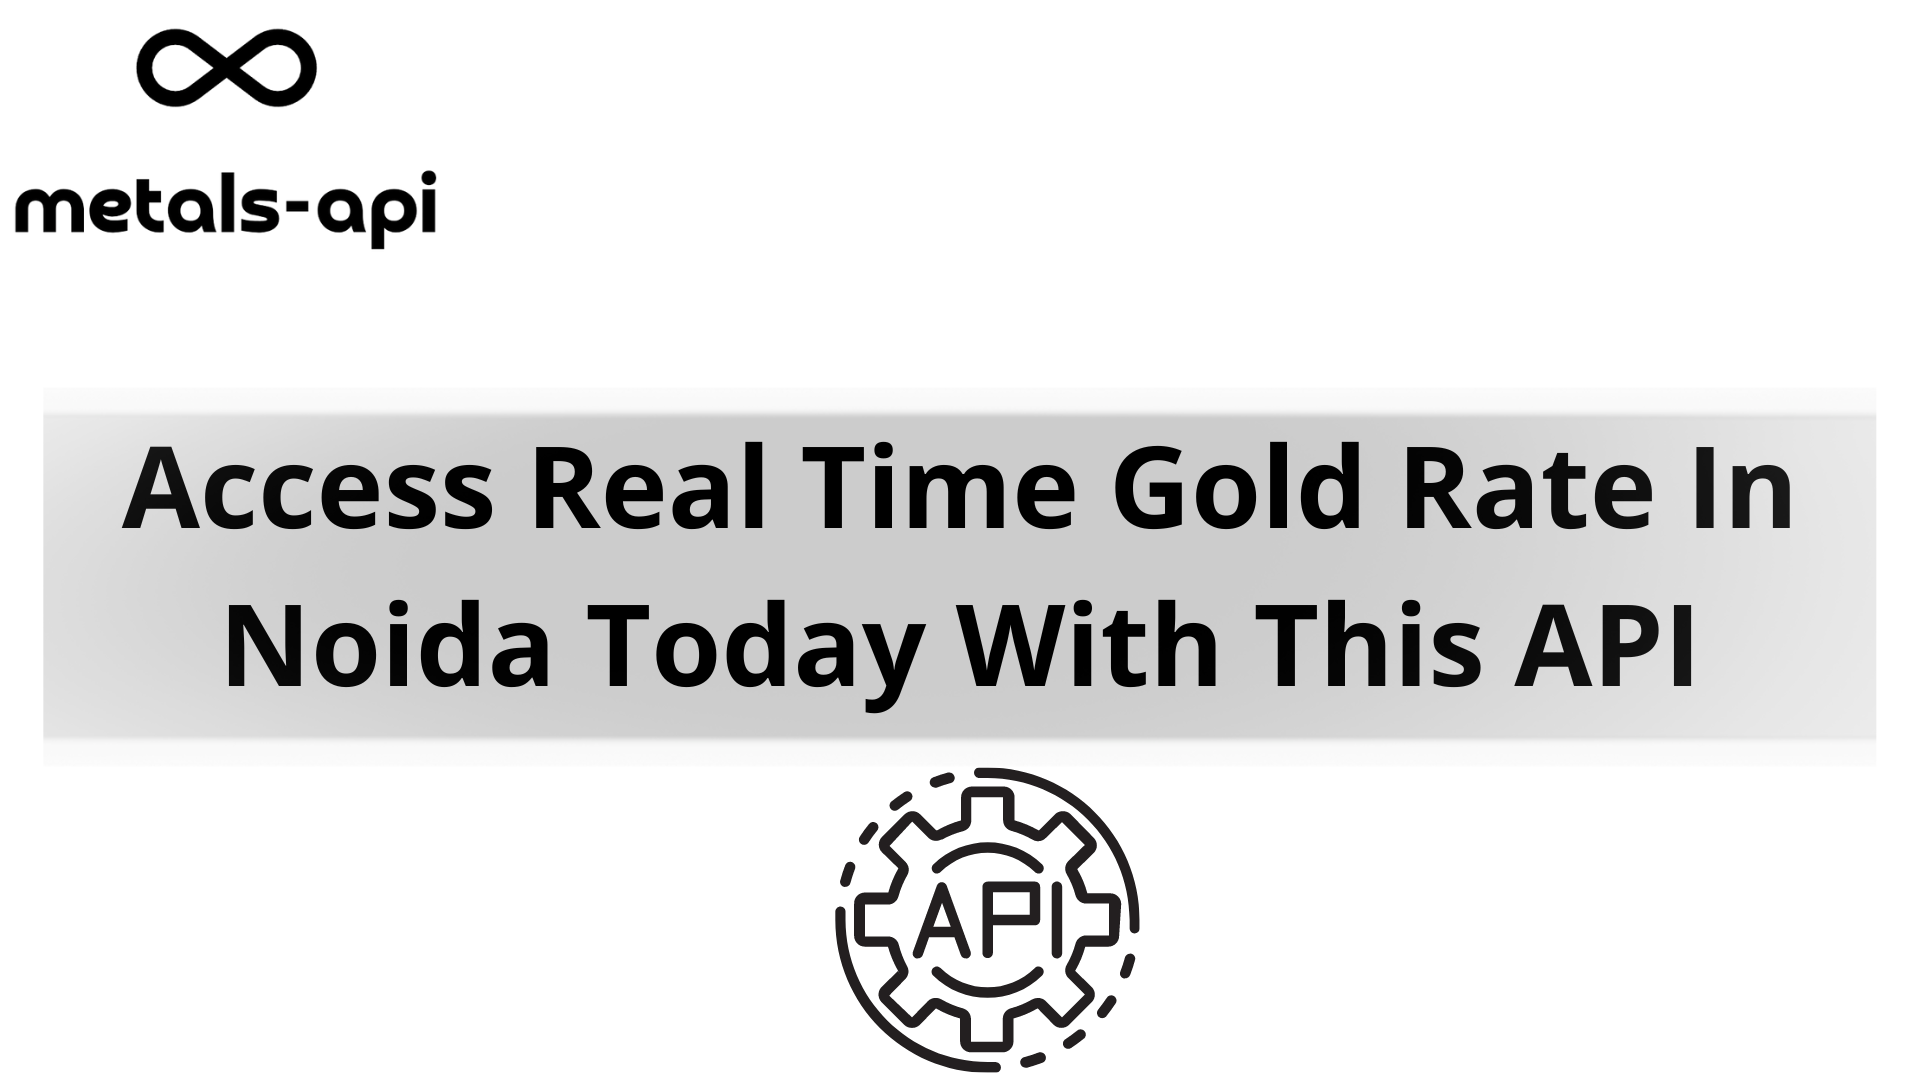 Access Real Time Gold Rate In Noida Today With This API